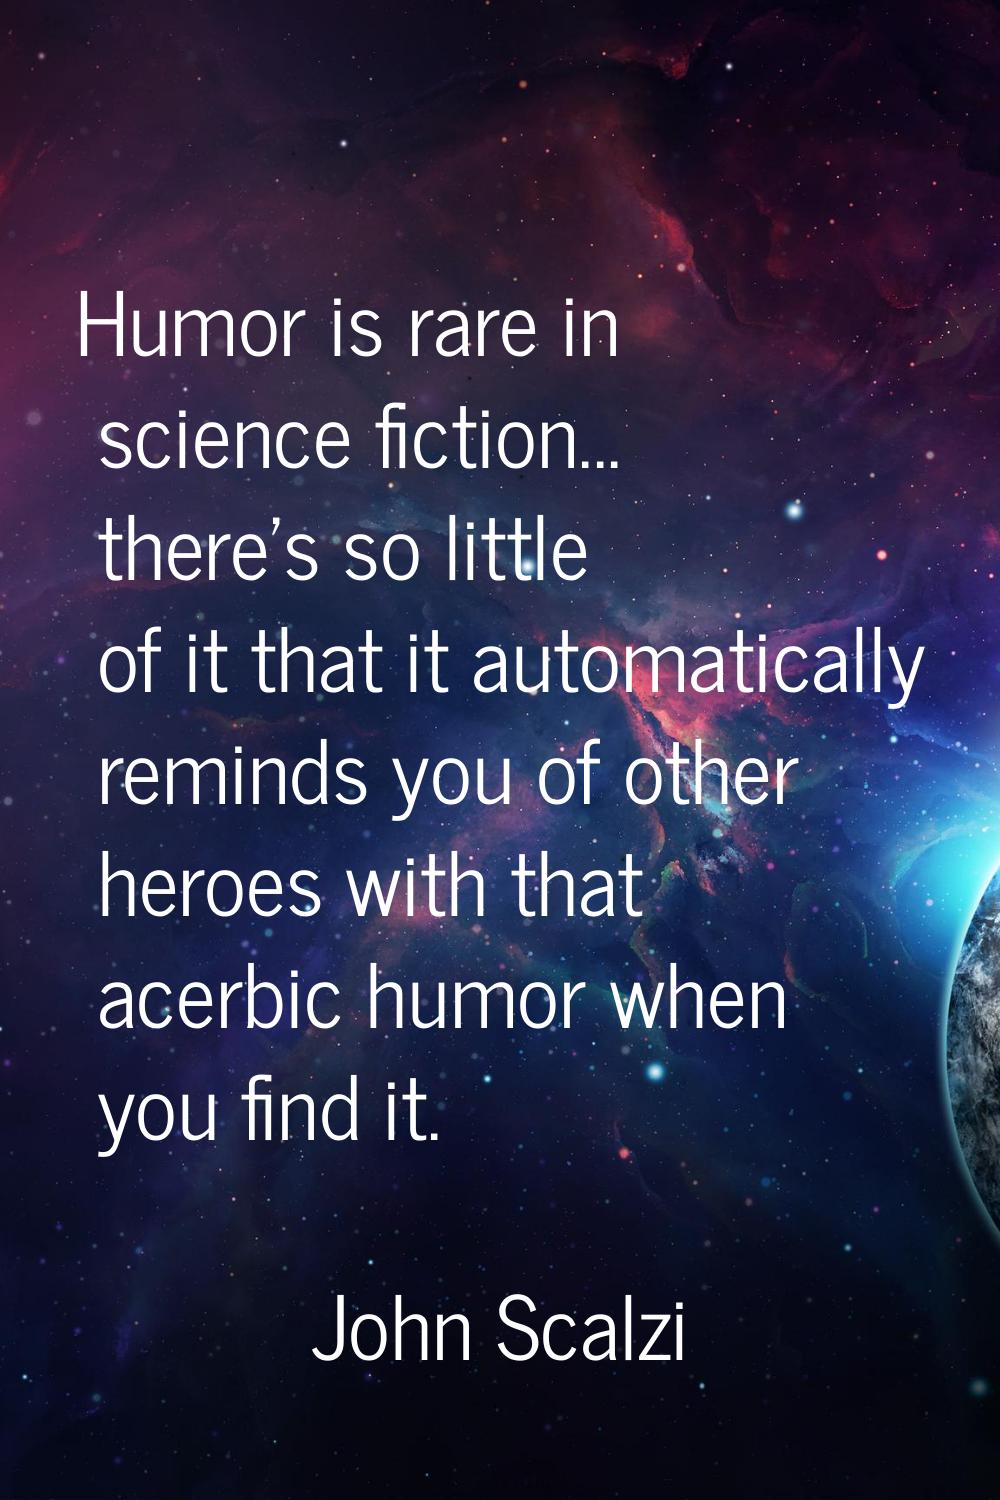 Humor is rare in science fiction... there's so little of it that it automatically reminds you of ot